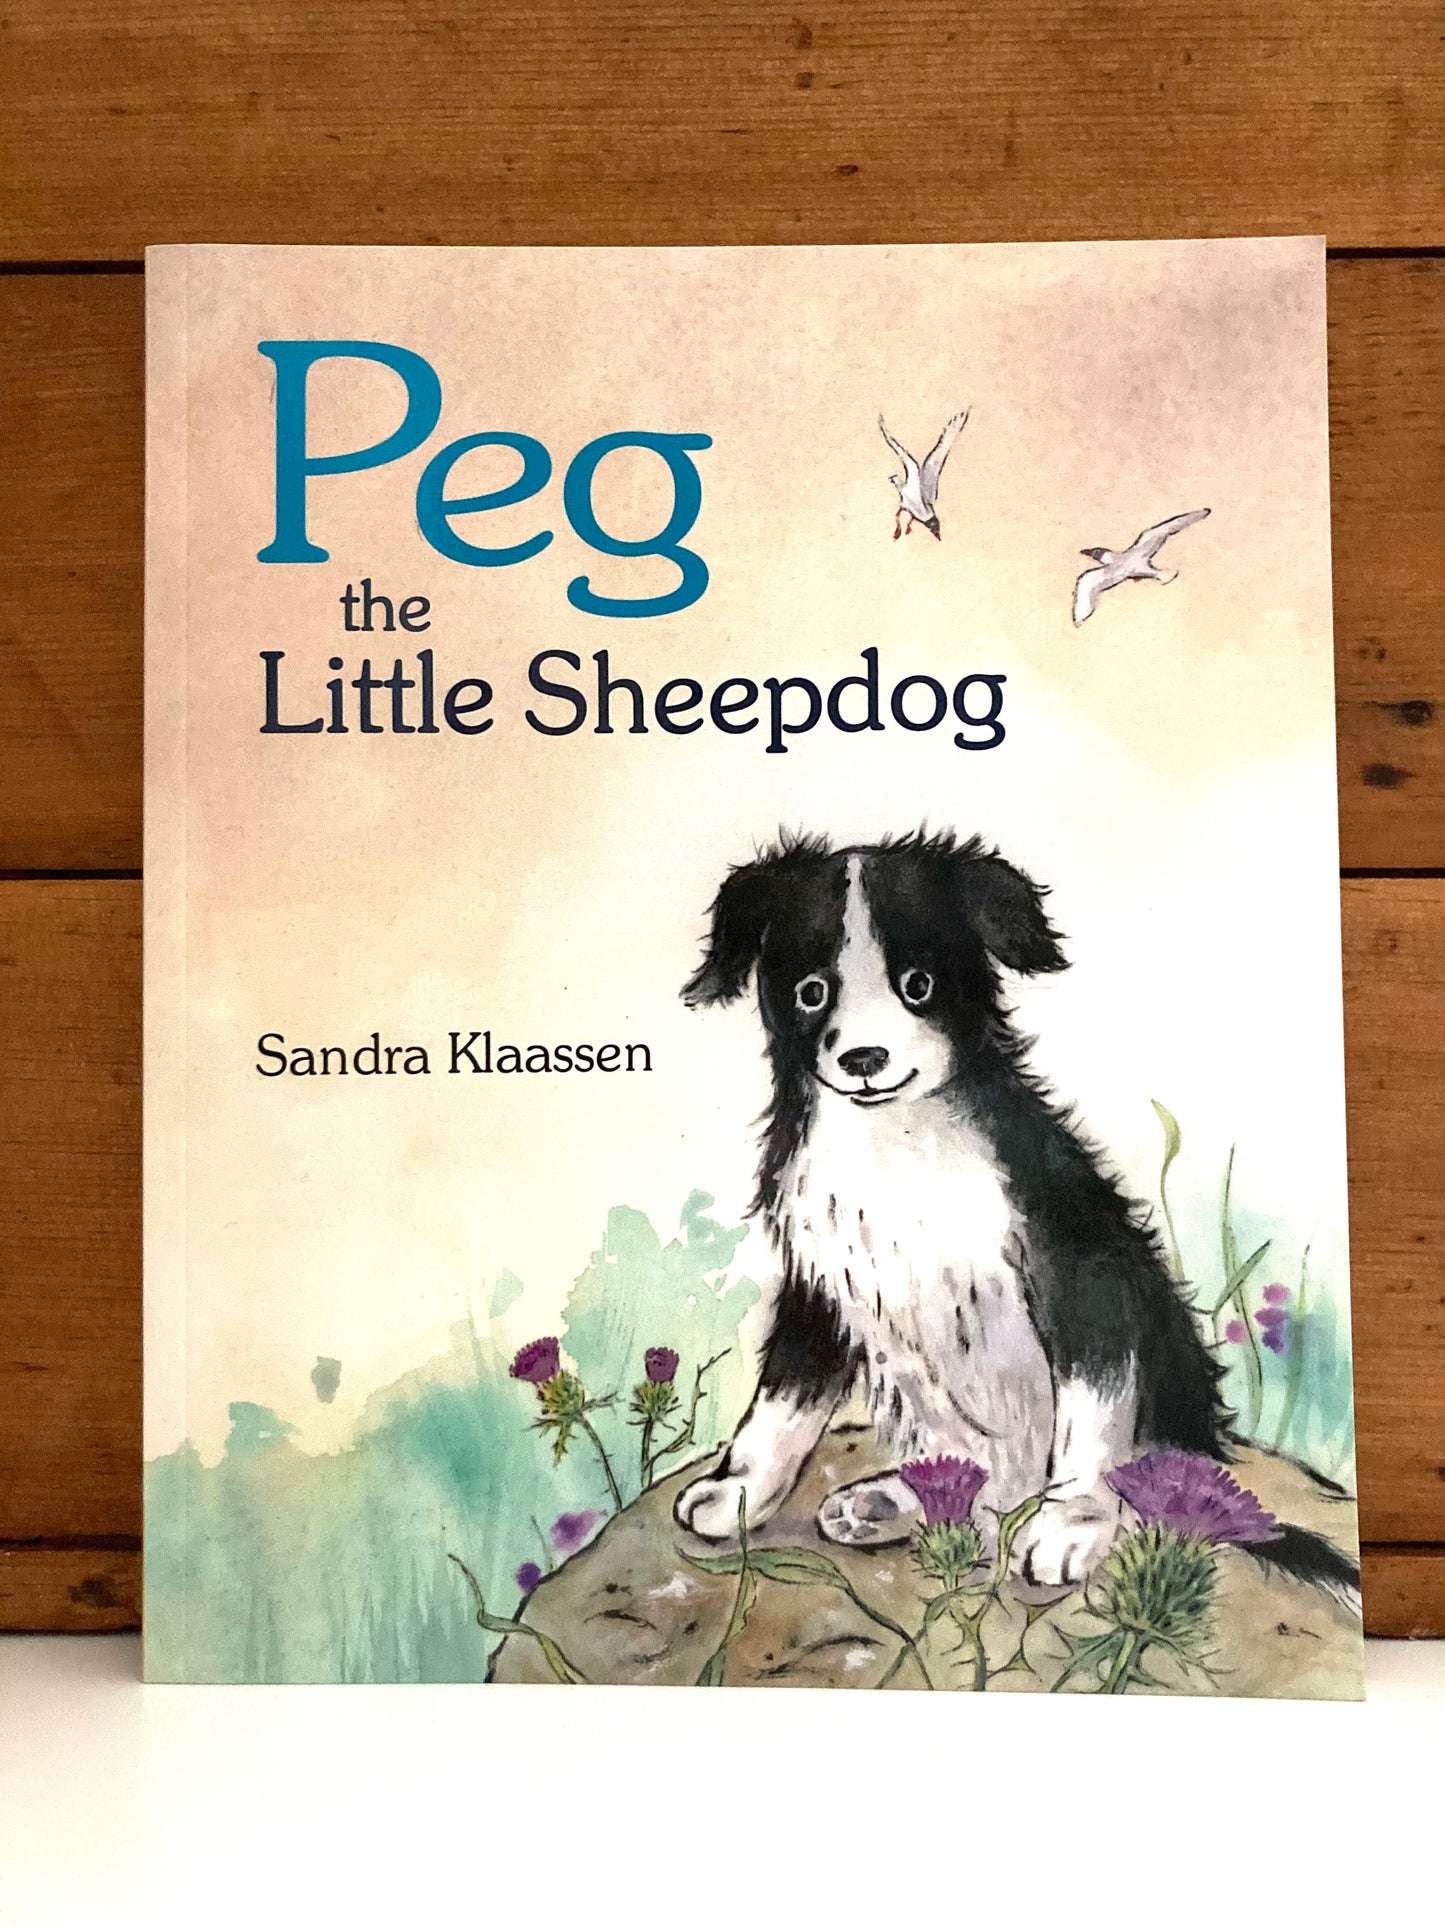 Children's Picture Book - PEG, the LITTLE SHEEPDOG, or UAN, the LITTLE LAMB